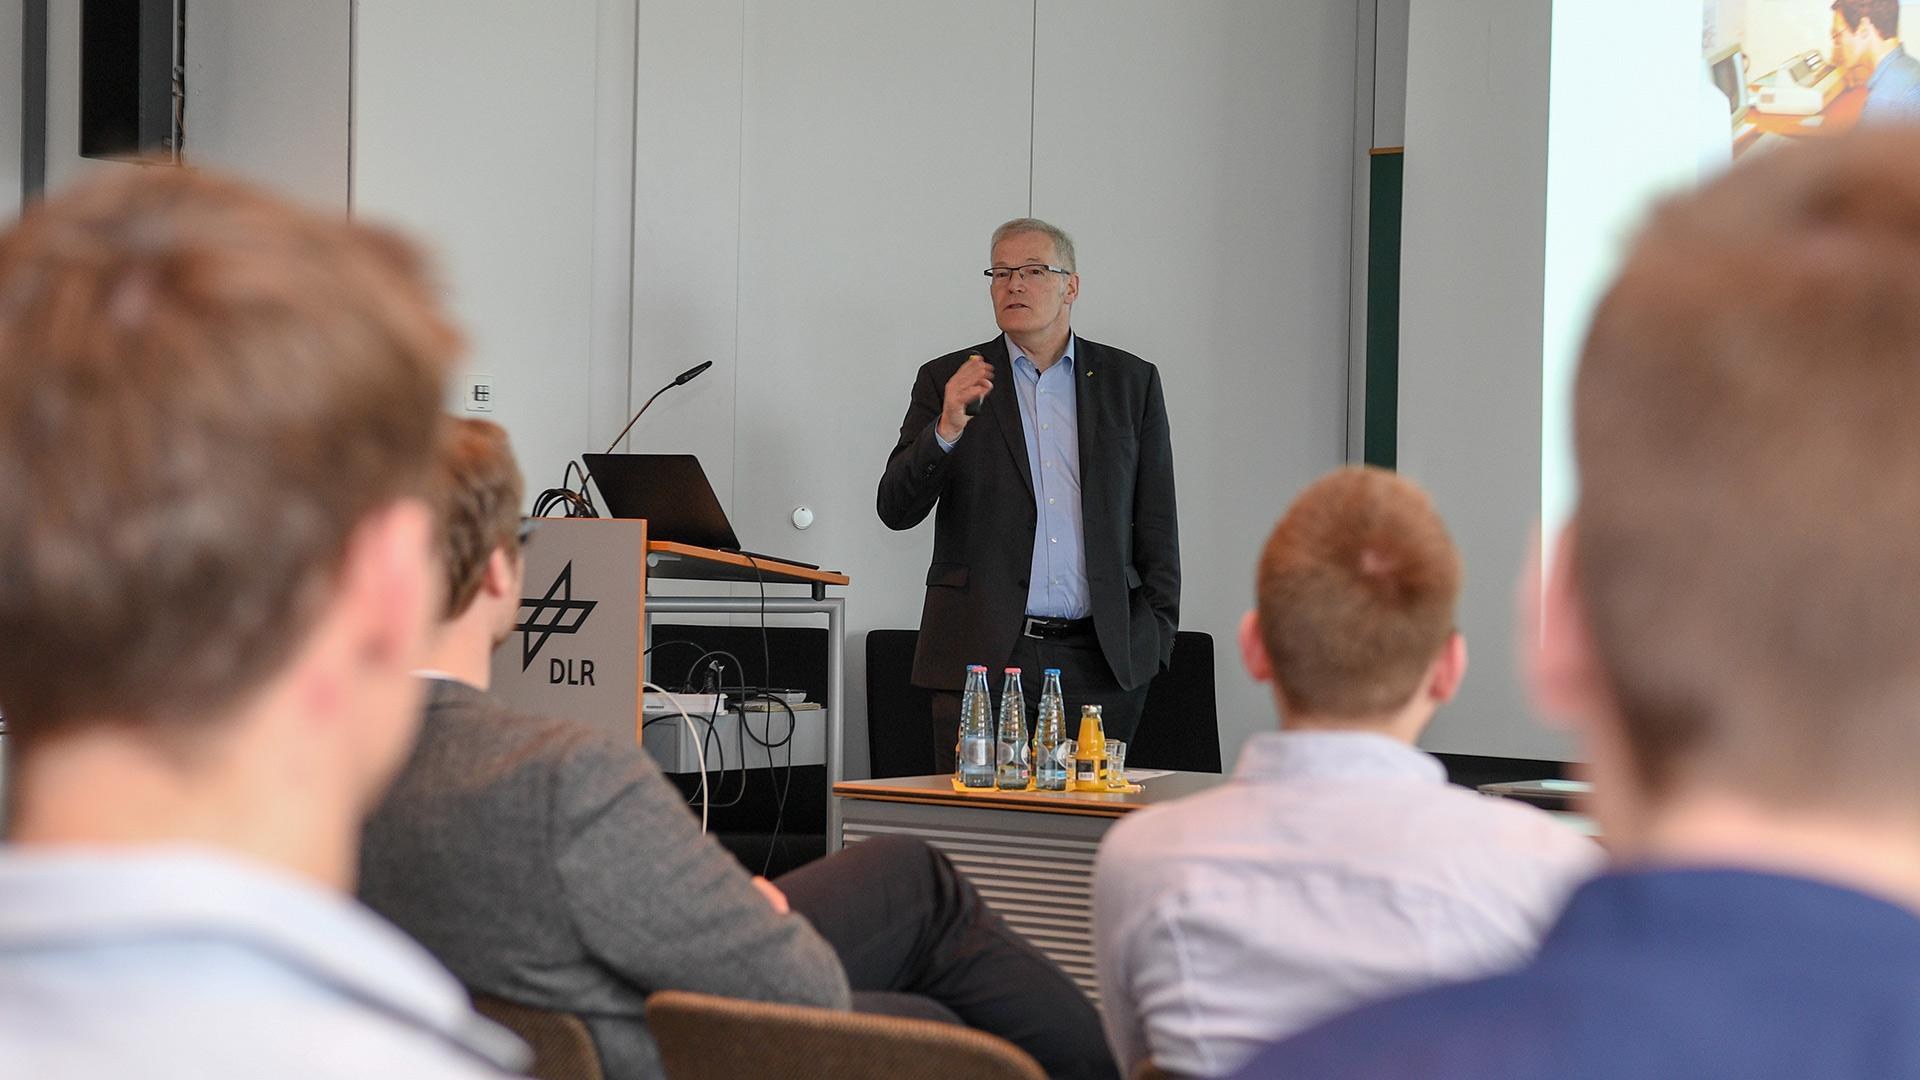 Rolf Henke, the DLR Executive Board Member for aeronautics research, welcomes the participants